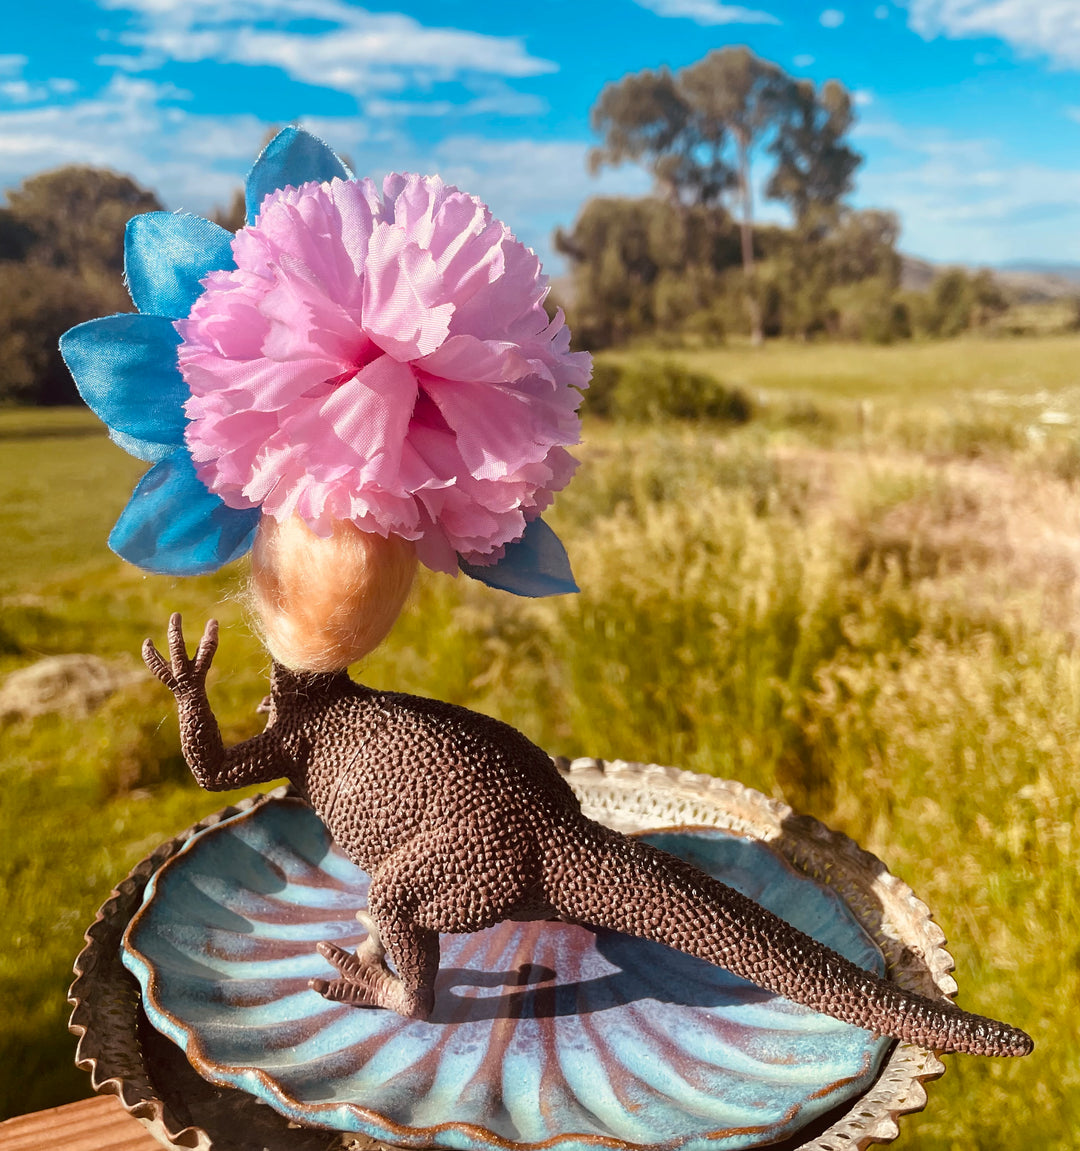 Vintage toy dinosaur with vintage doll head and flower headdress. 5" tall x 5" long x 3" wide.